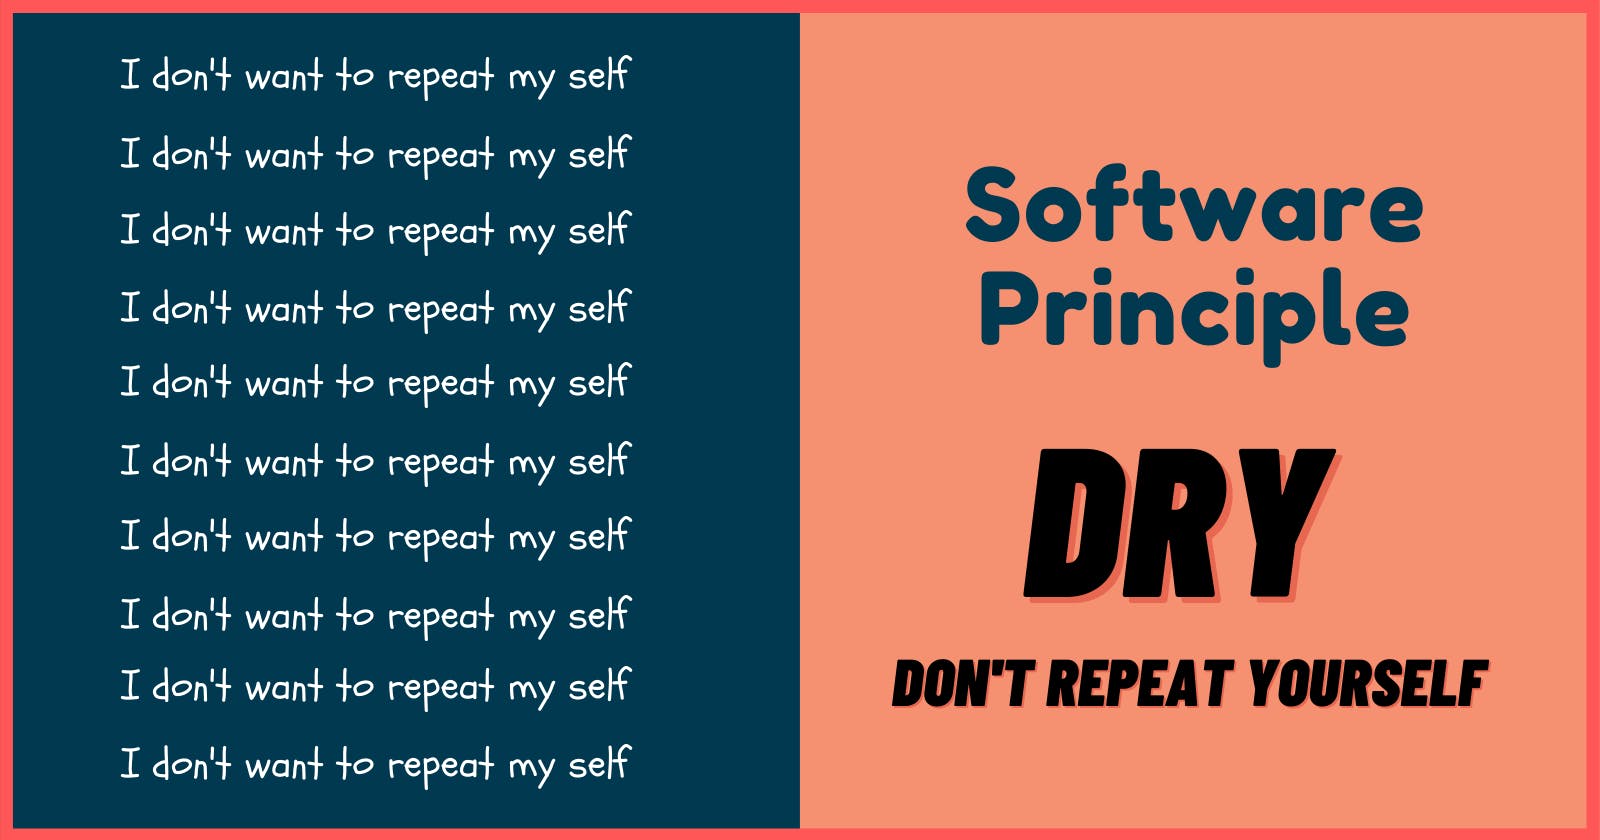 Don't repeat yourself: DRY Principle in software engineering